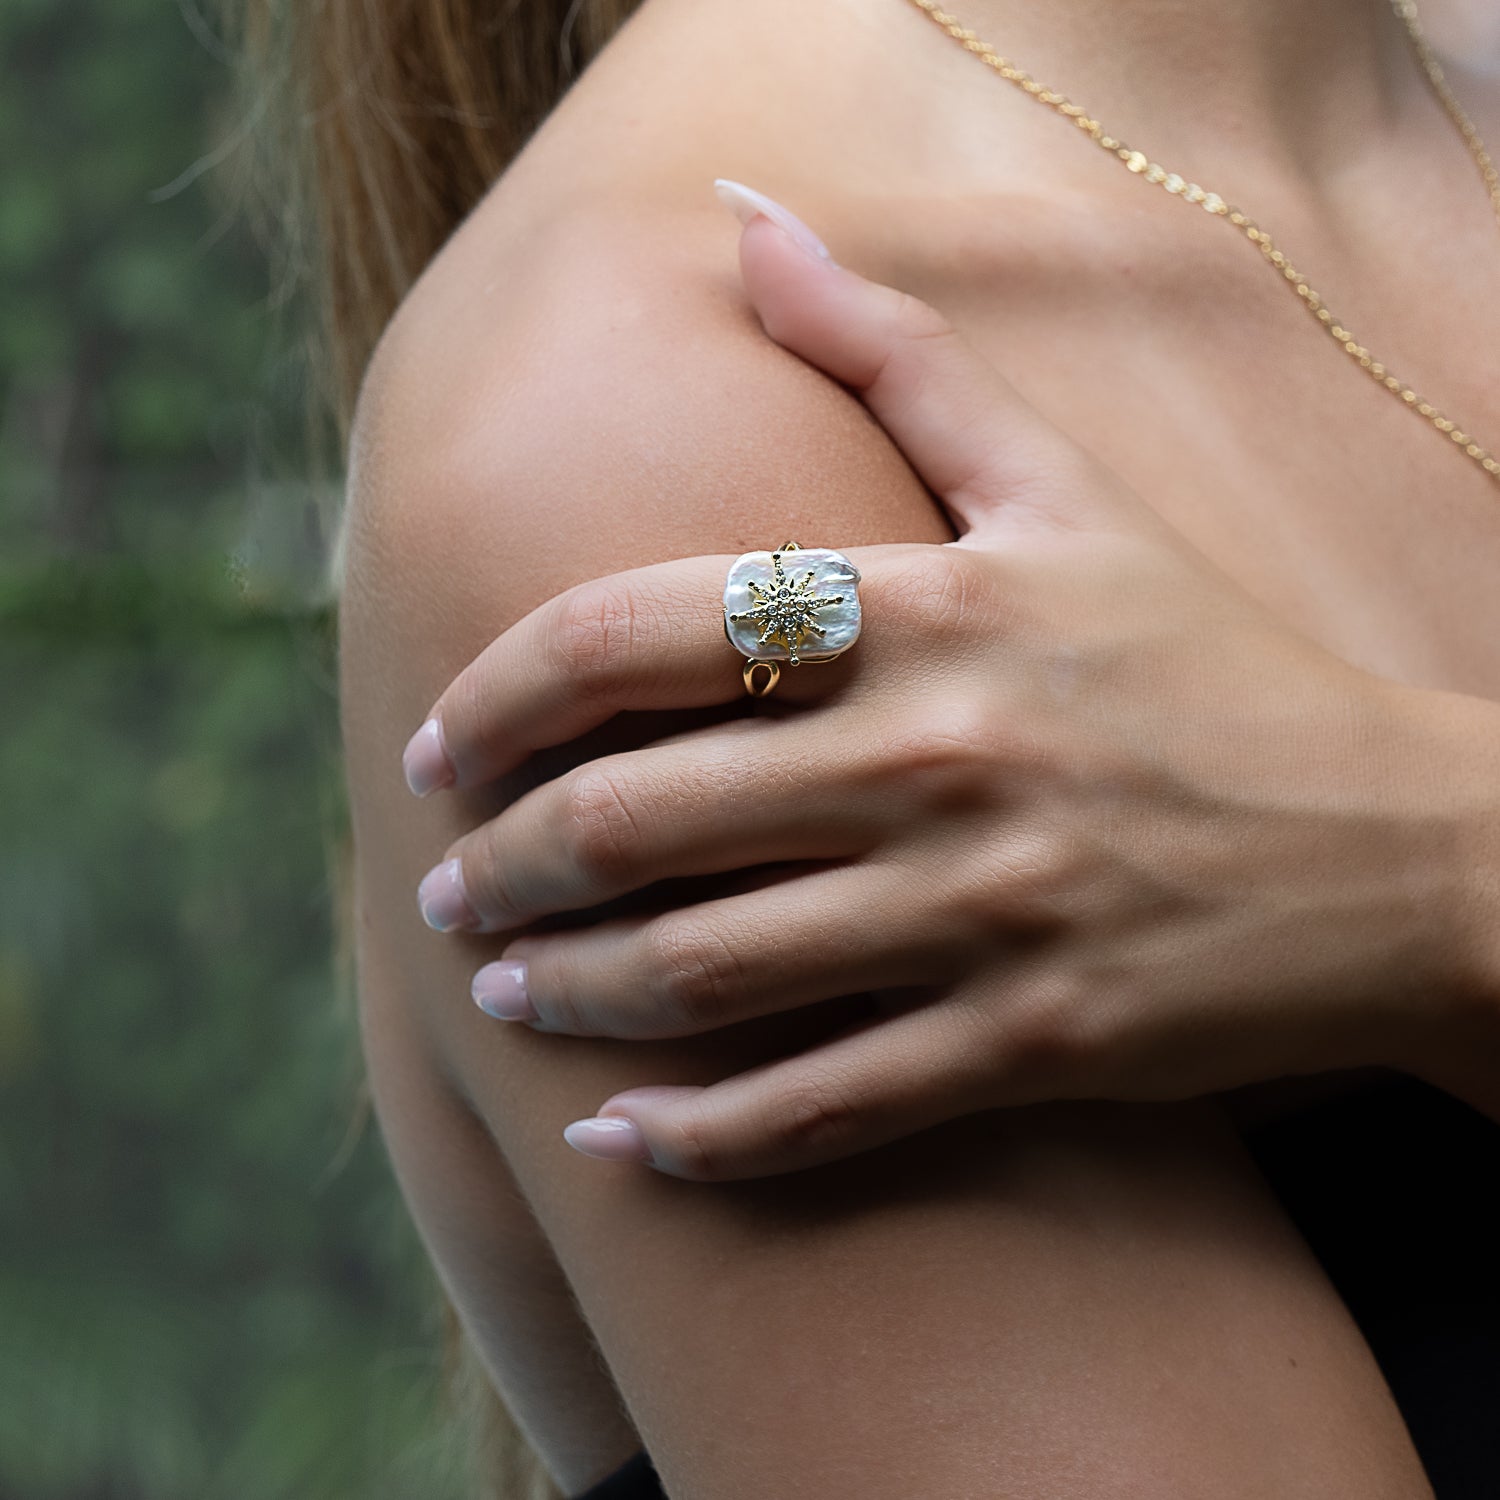 Channeling Cleopatra's allure: Model adorned with the elegant pearl ring.